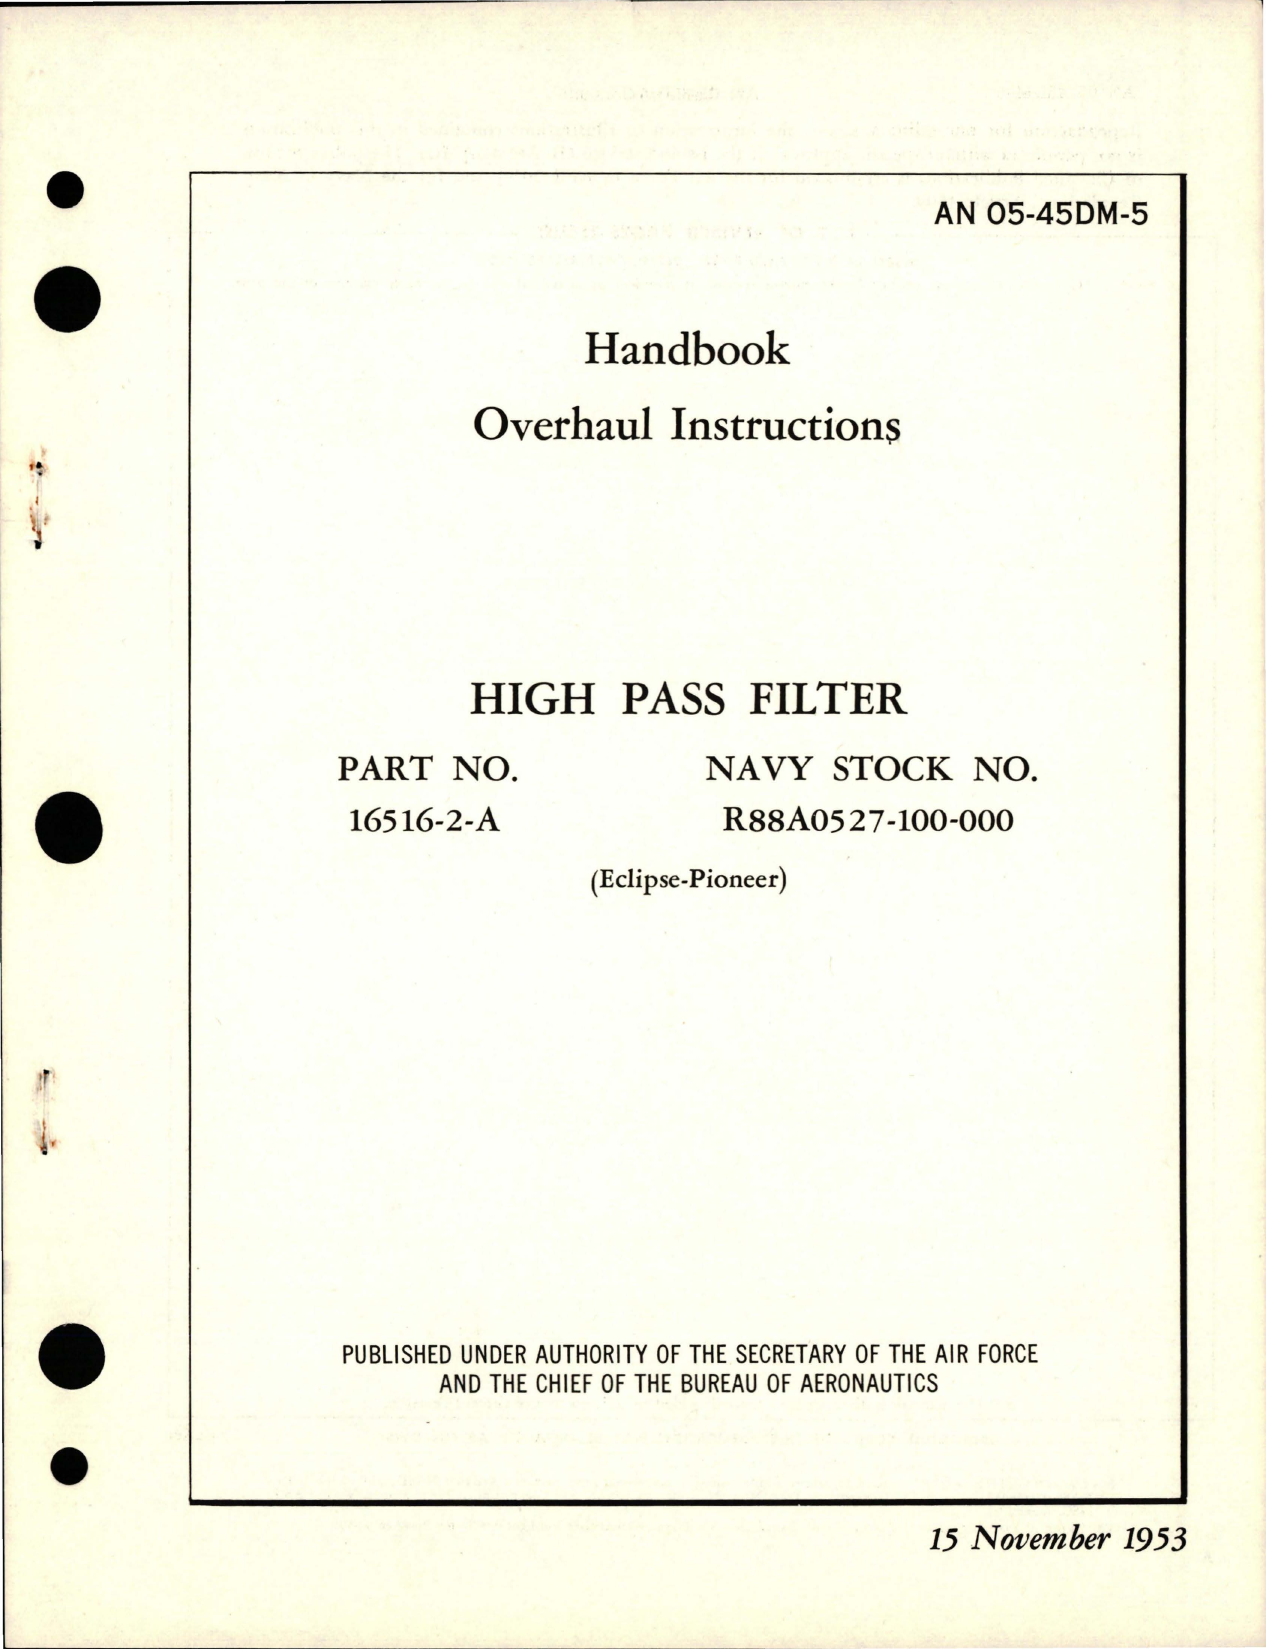 Sample page 1 from AirCorps Library document: Overhaul Instructions for High Pass Filter - Part 16516-2-A